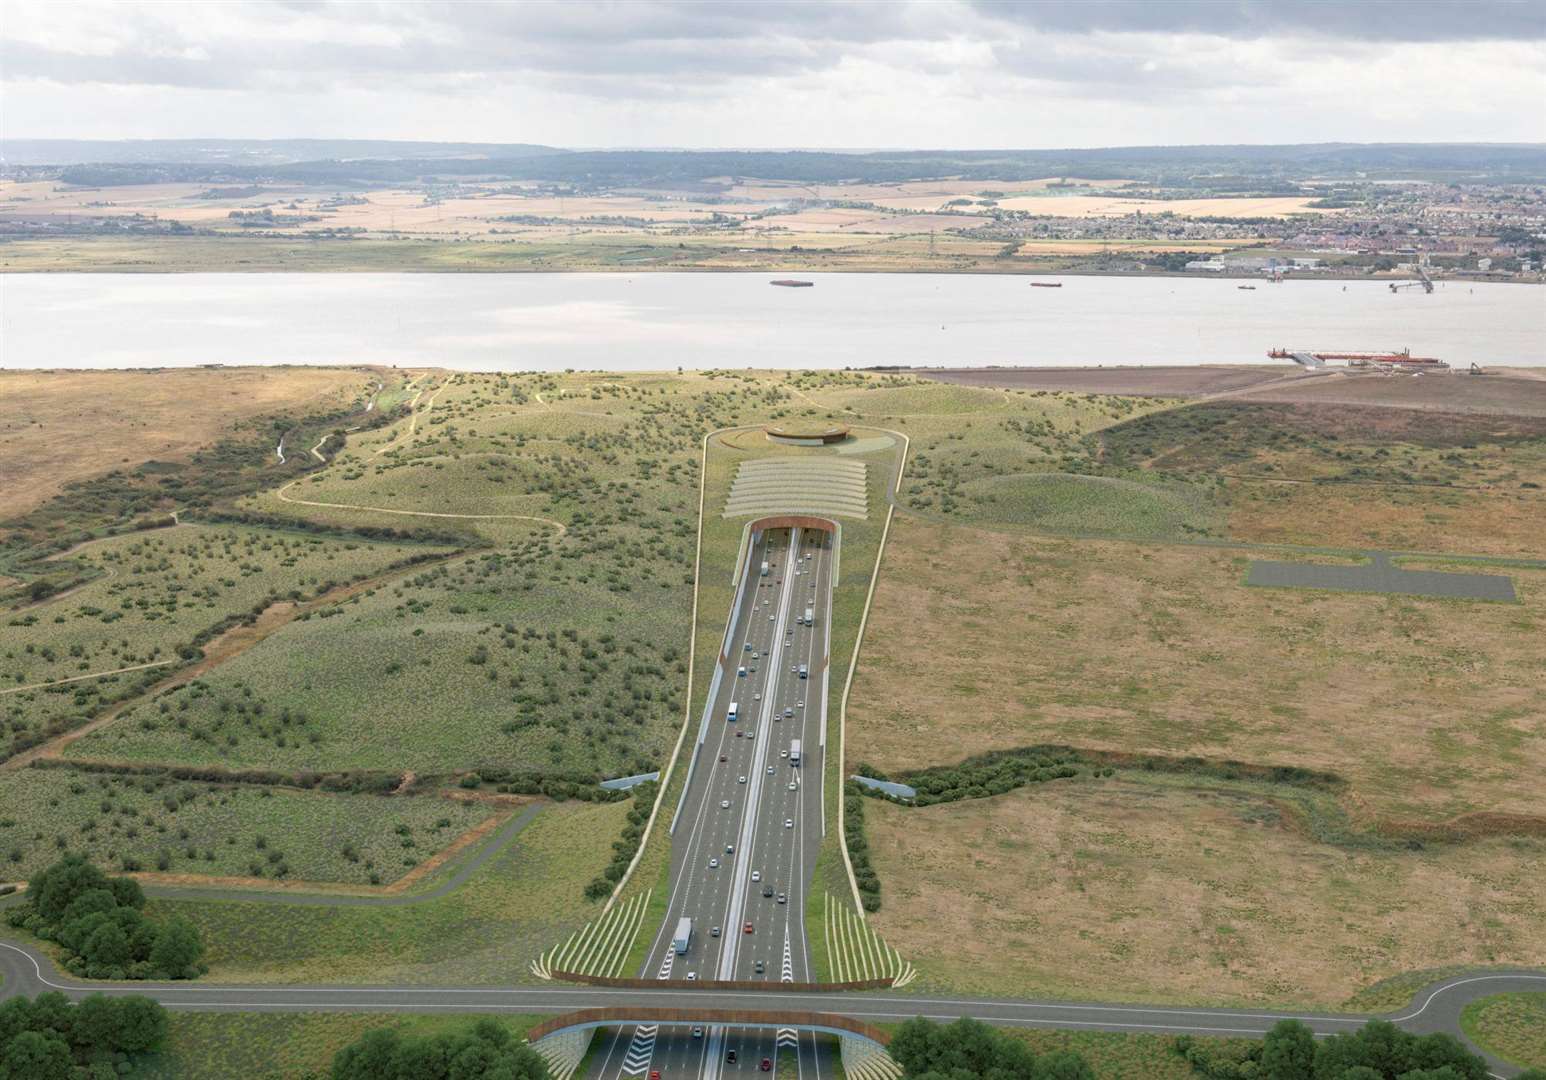 Planning for the Lower Thames Crossing has cost £300m so far. Credit: Highways England